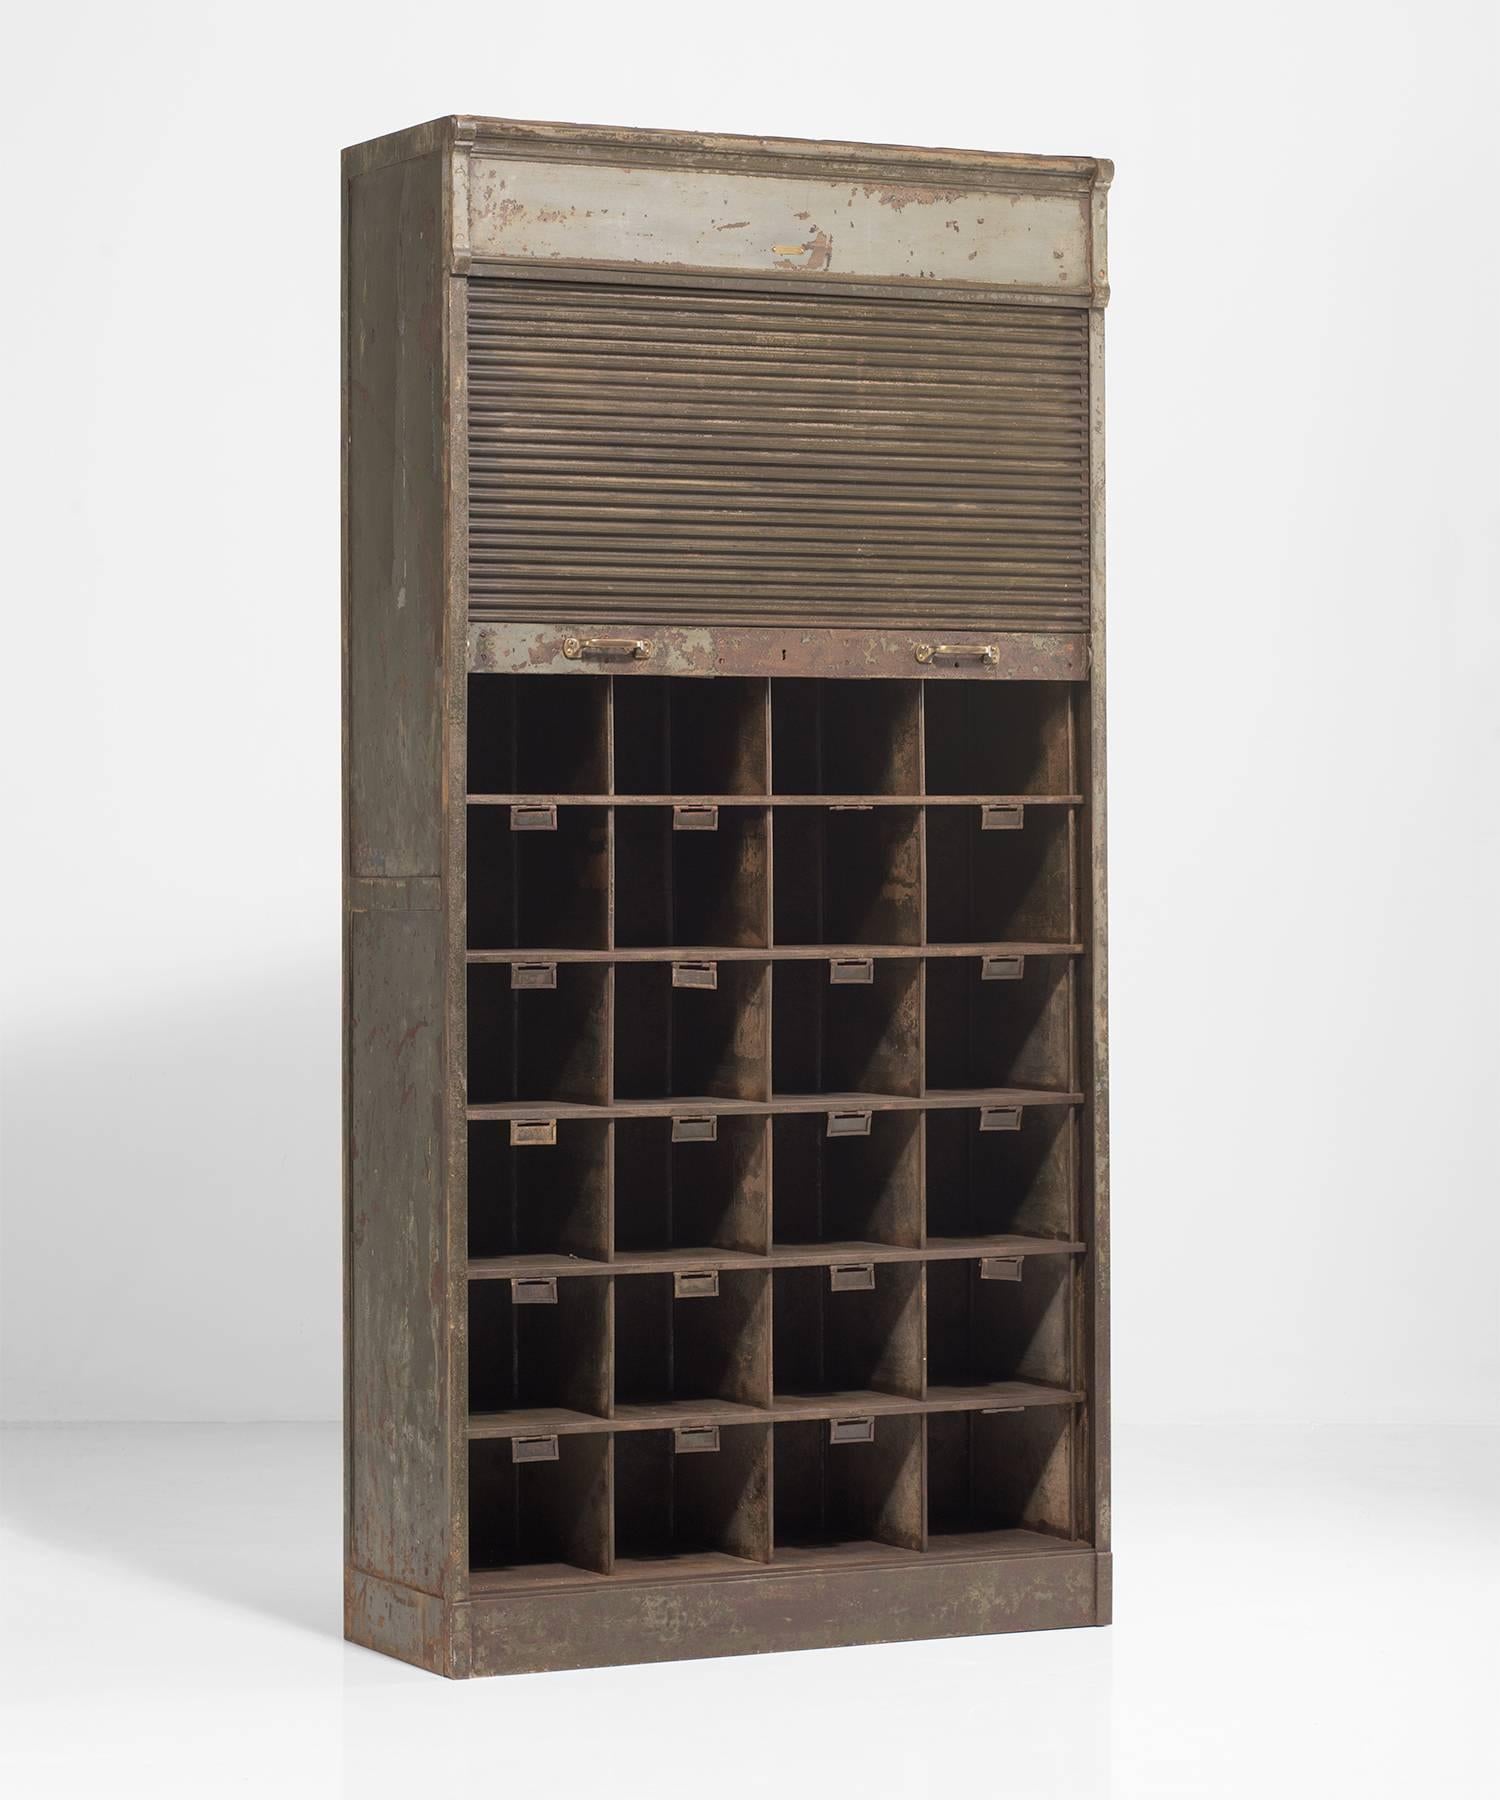 Industrial roller cabinet by Strafers, circa 1930.

Metal cabinet with original green paint and identical square compartments.